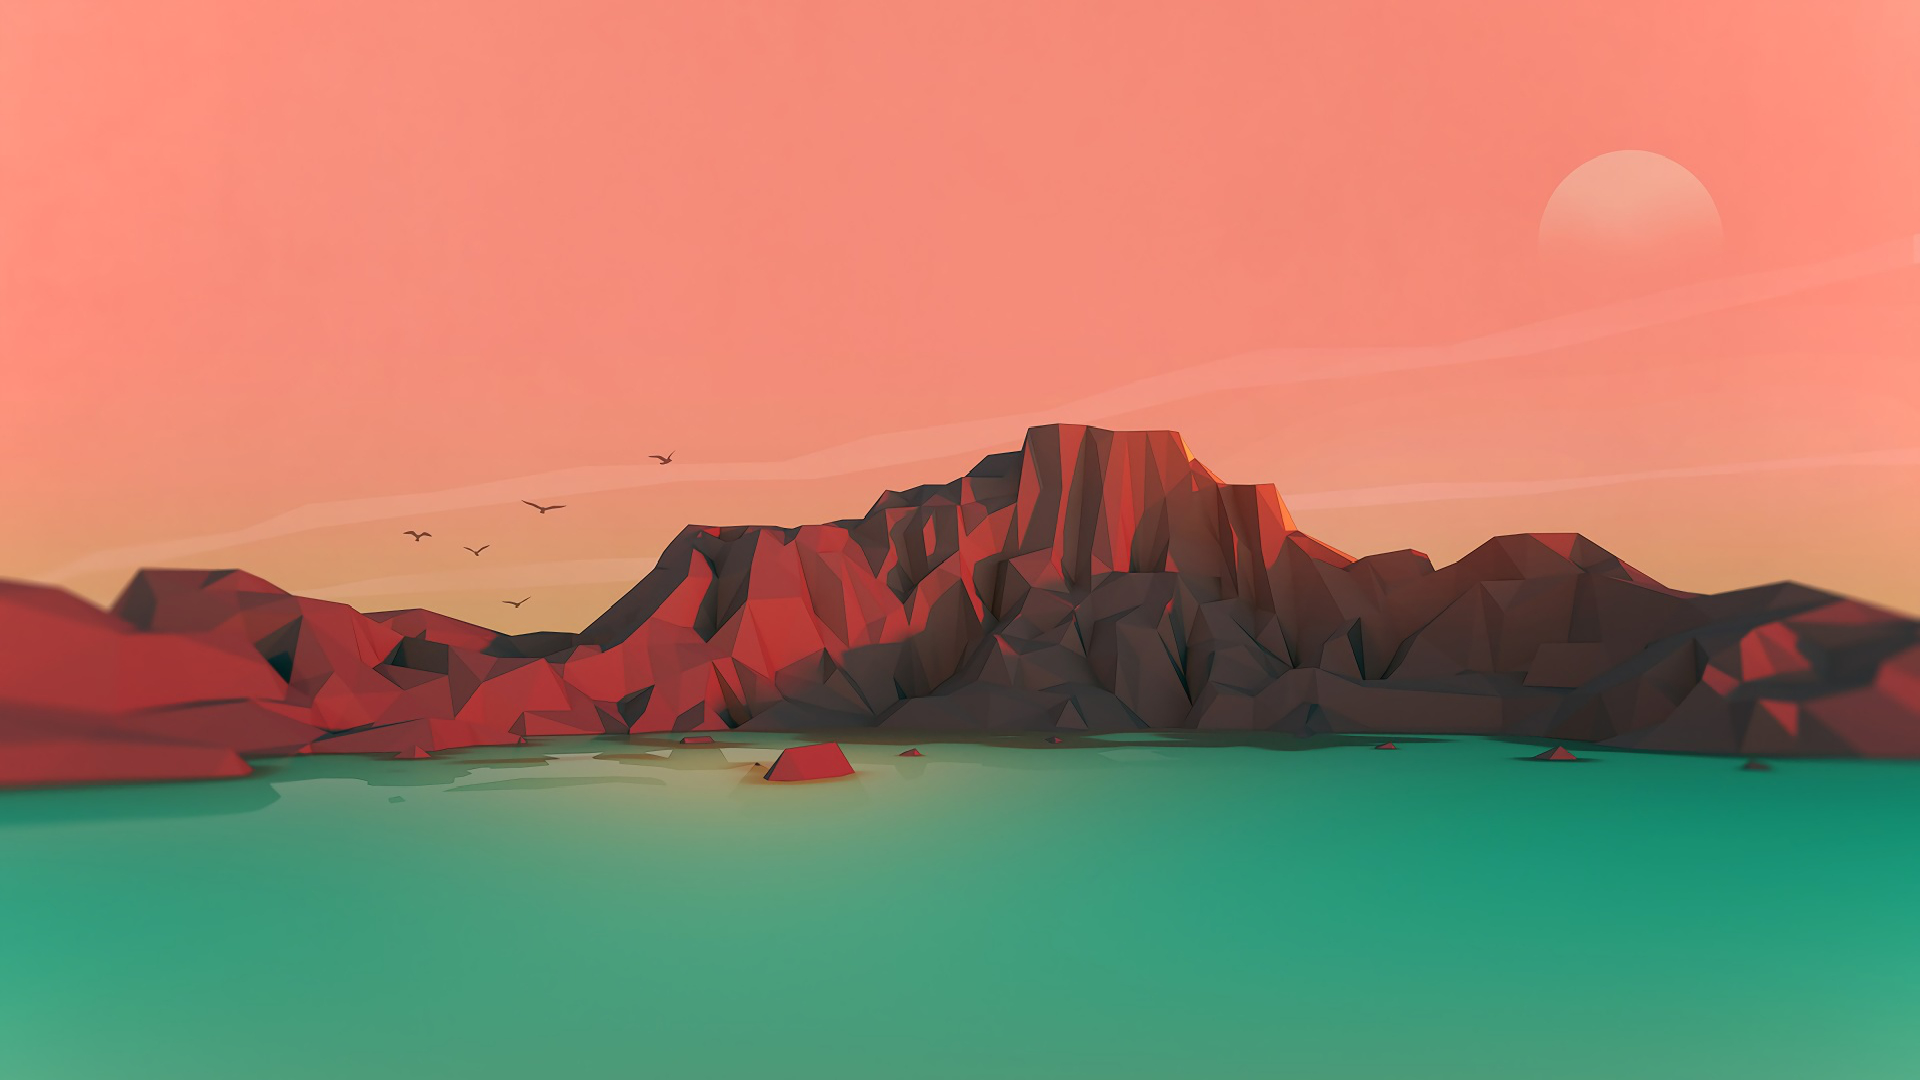 Low Poly , HD Wallpaper & Backgrounds